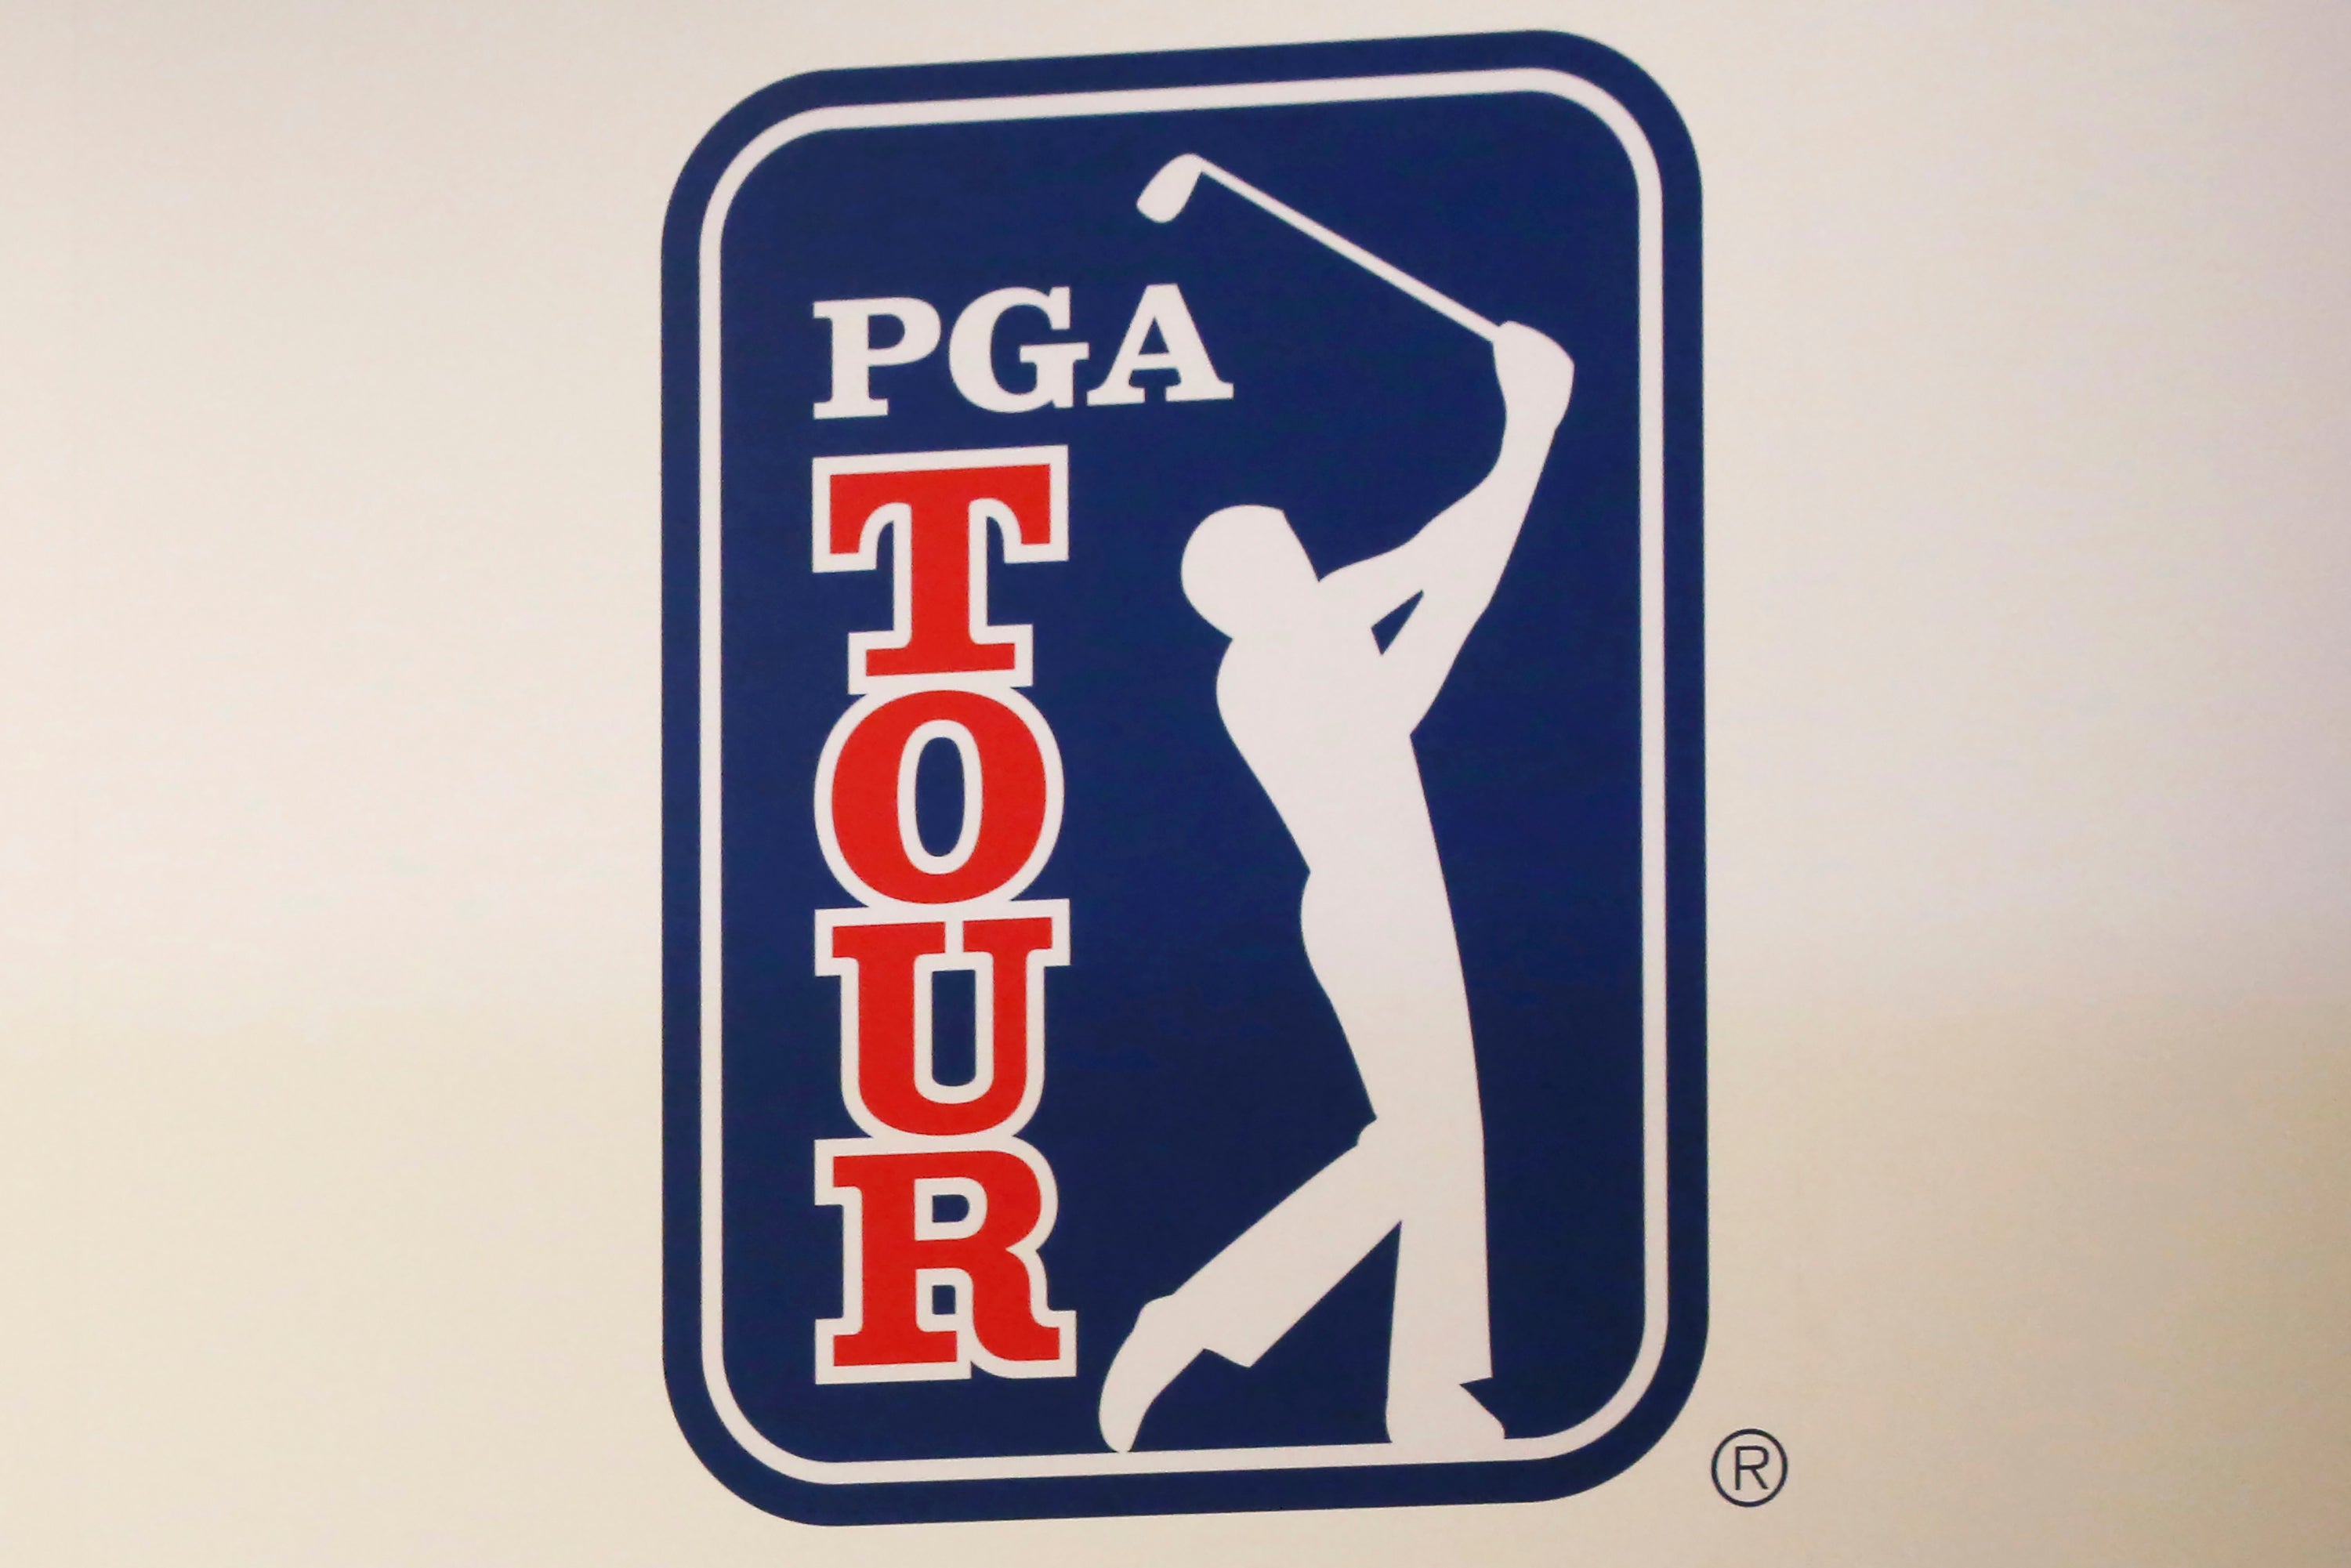 The PGA Tour is close to finalising an agreement with the Saudi Arabian Public Investment Fund and the DP World Tour